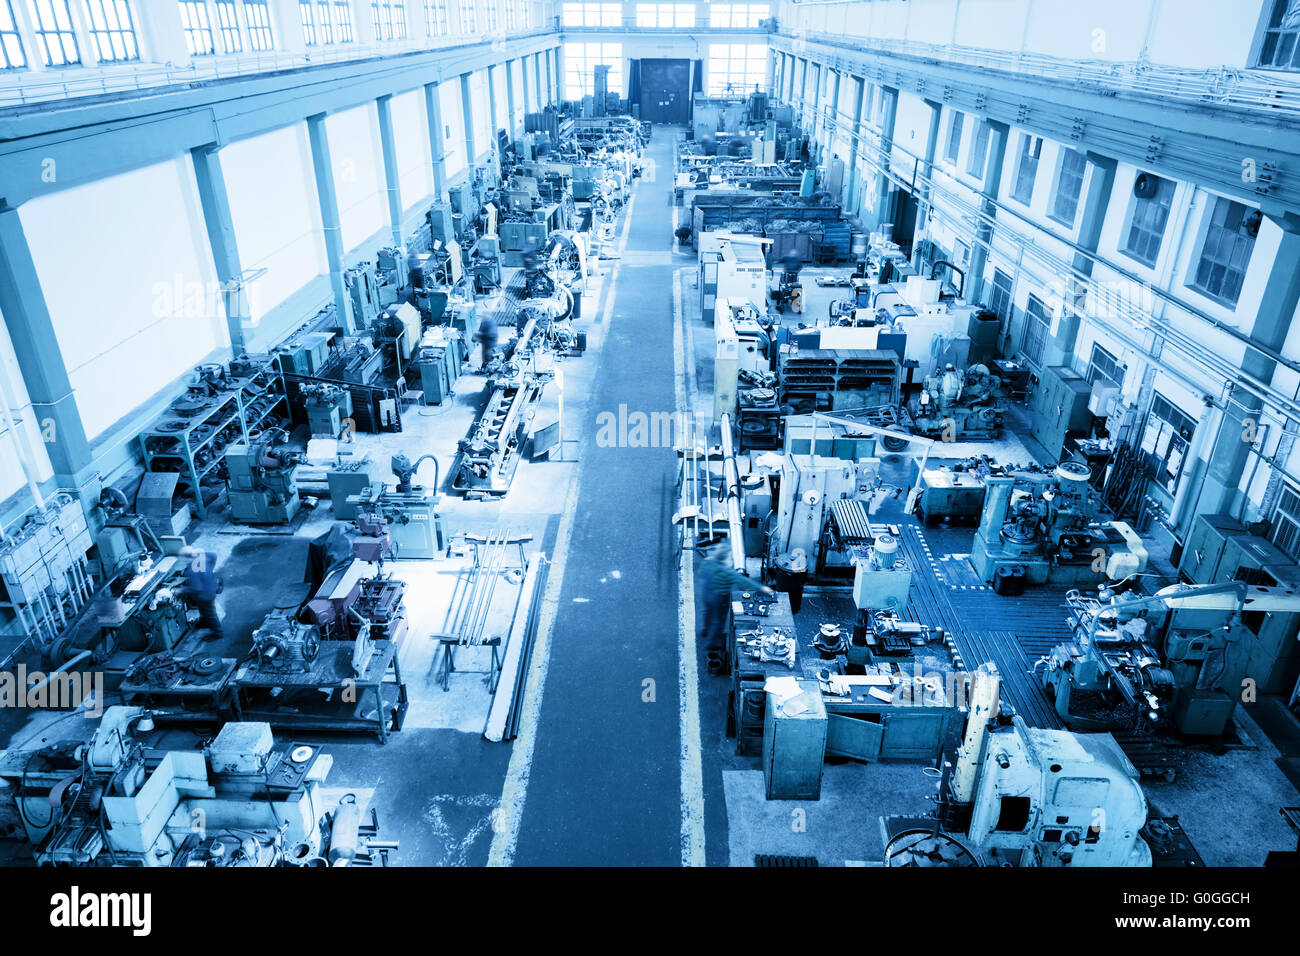 Heavy industry workshop, factory. CNC machines. Aerial view. Stock Photo